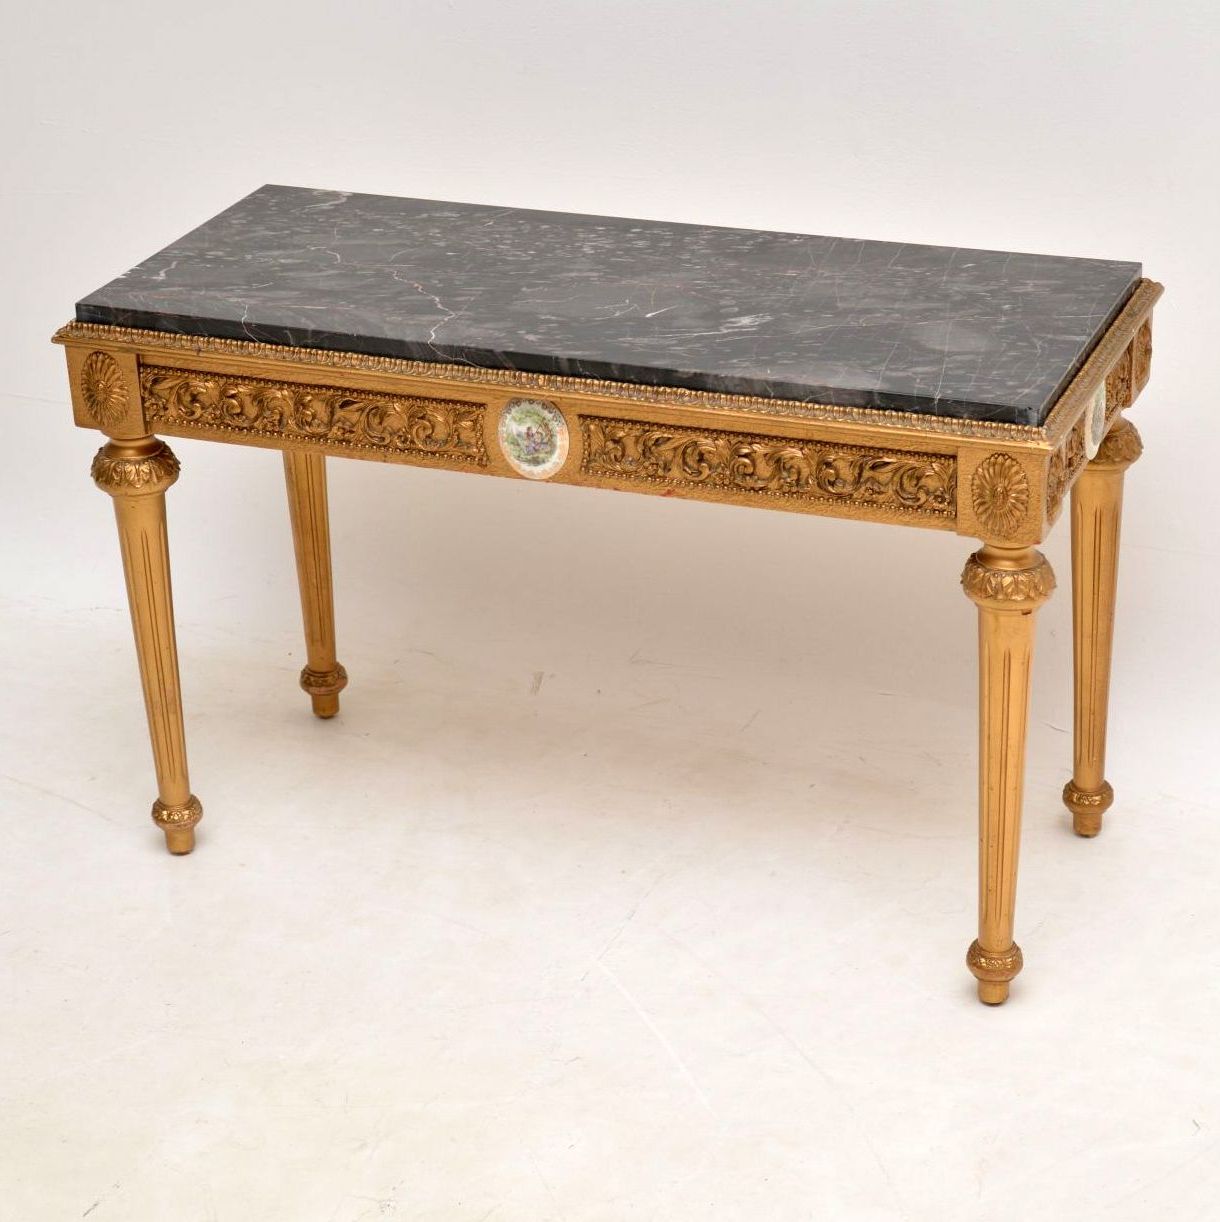 Recent Marble Top Coffee Tables In Antique French Marble Top Gilt Coffee Table – Marylebone (View 7 of 20)